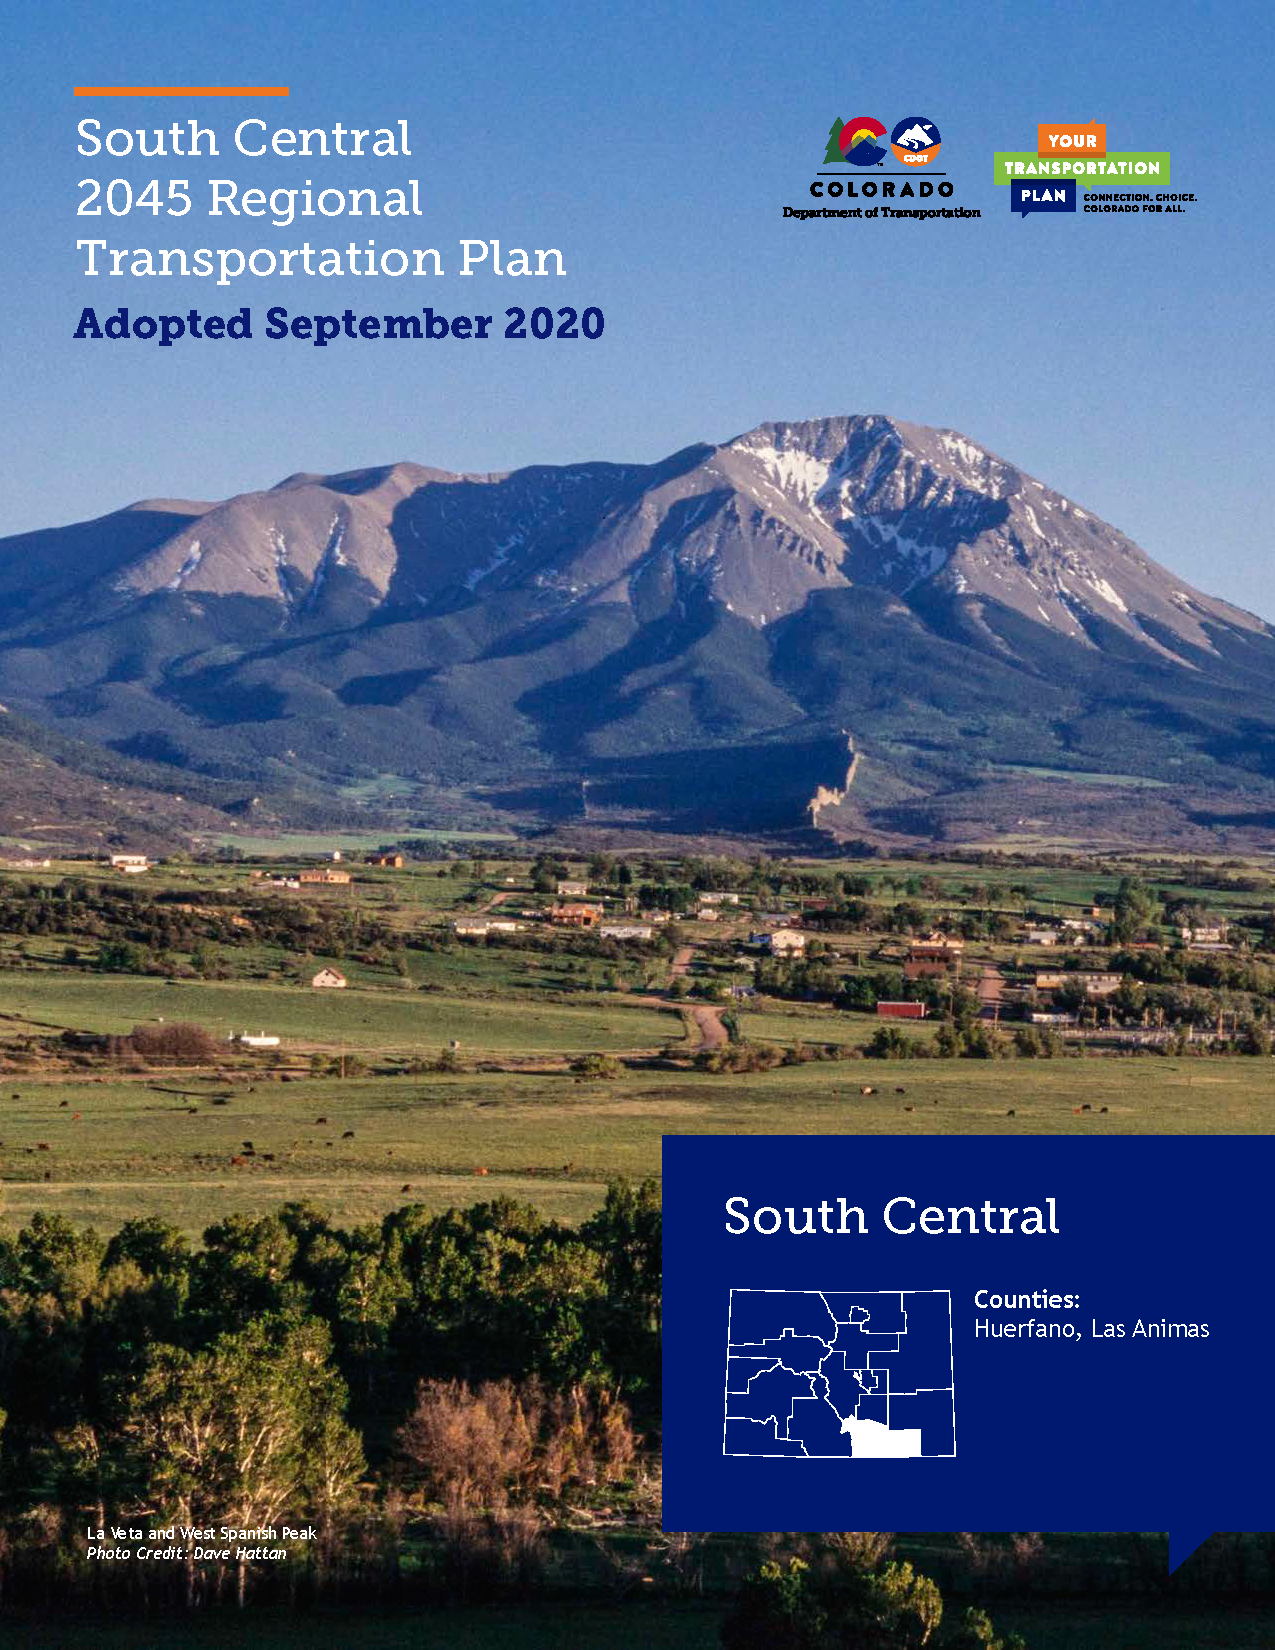 SouthCentral_Cover.jpg detail image